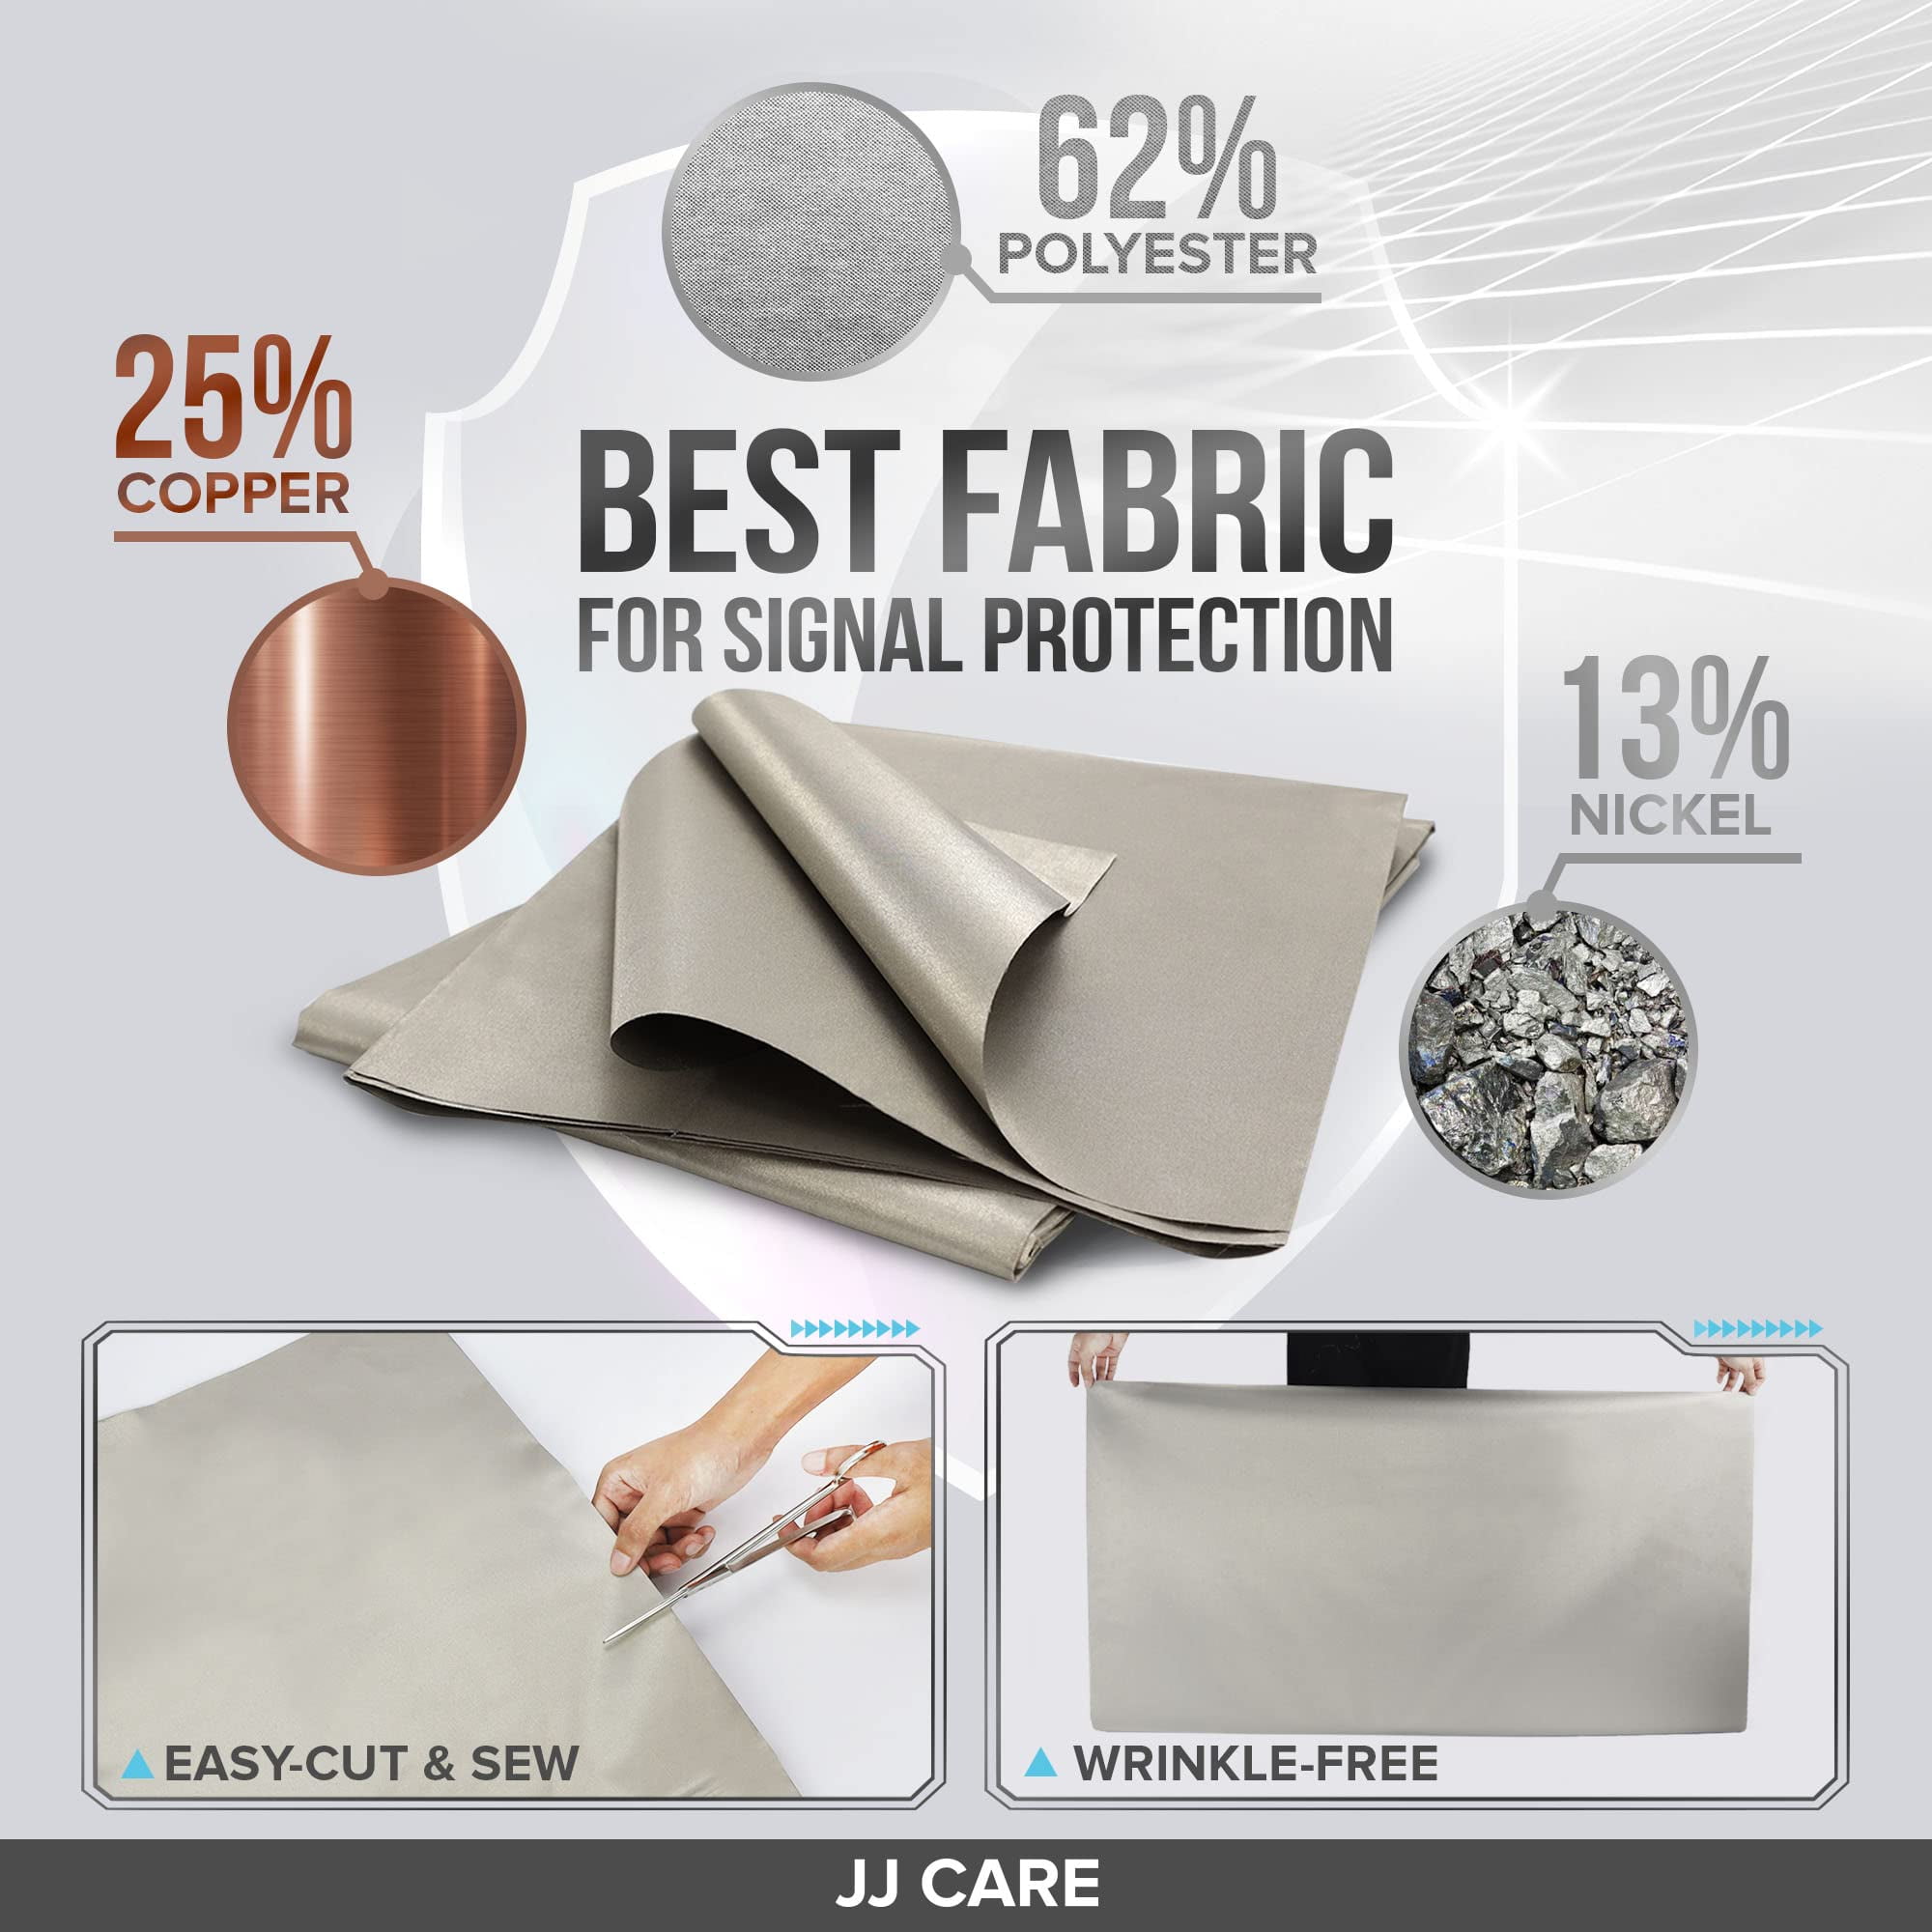 Faraday Fabric Faraday Cage Military Grade Conductive Material for  Protection for Anti Theft Swipe Card Cellular Signal, WiFi, Bluetooth, GPS  44''x